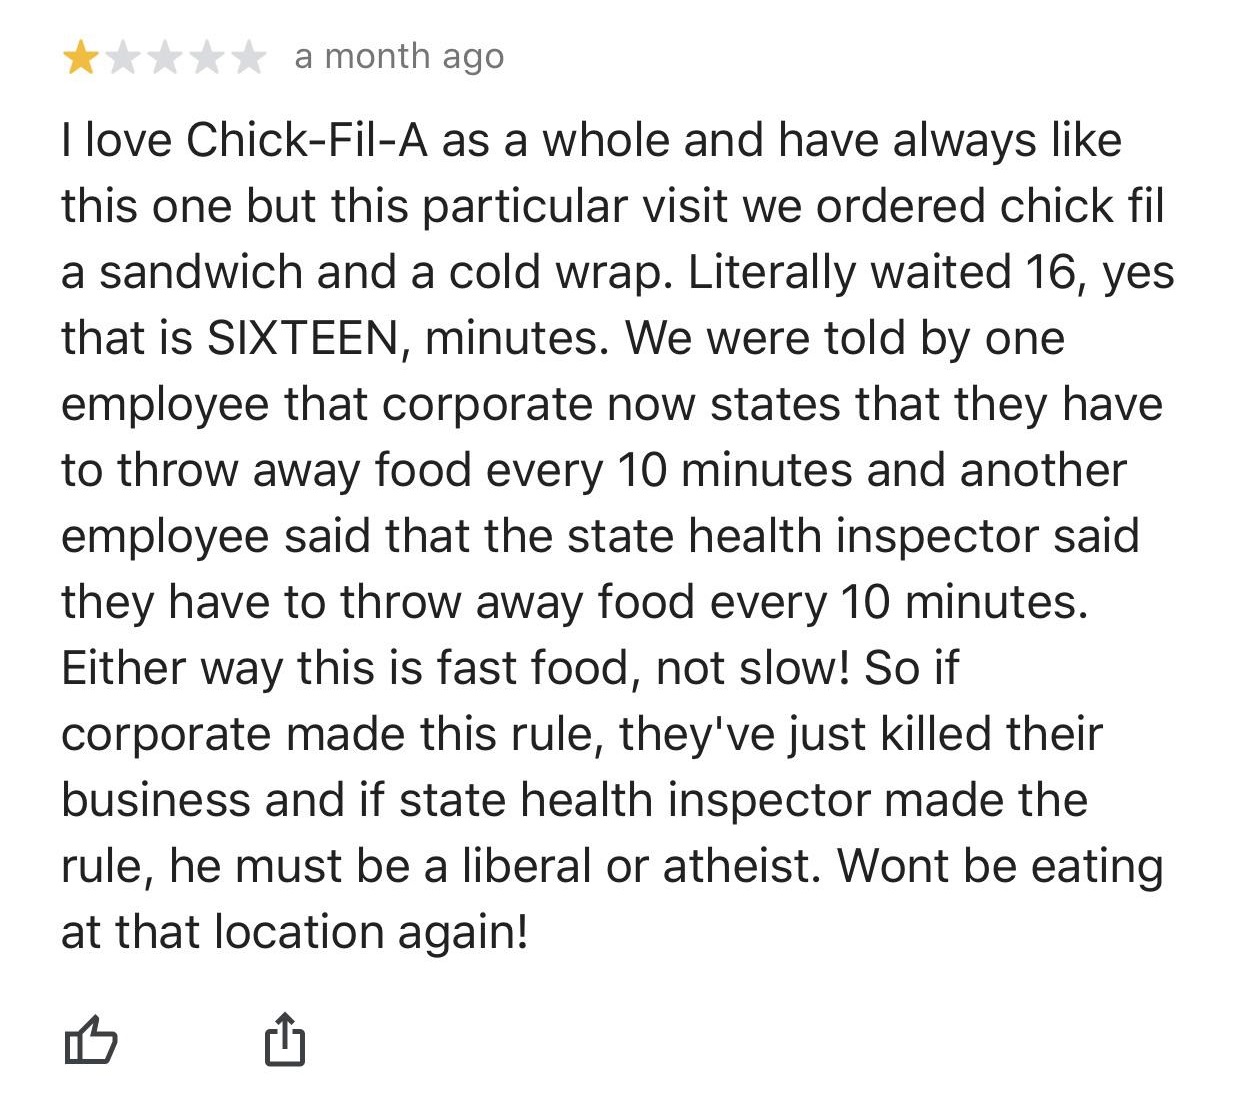 a month ago I love ChickFilA as a whole and have always this one but this particular visit we ordered chick fil a sandwich and a cold wrap. Literally waited 16, yes that is Sixteen, minutes. We were told by one employee that corporate now states that they